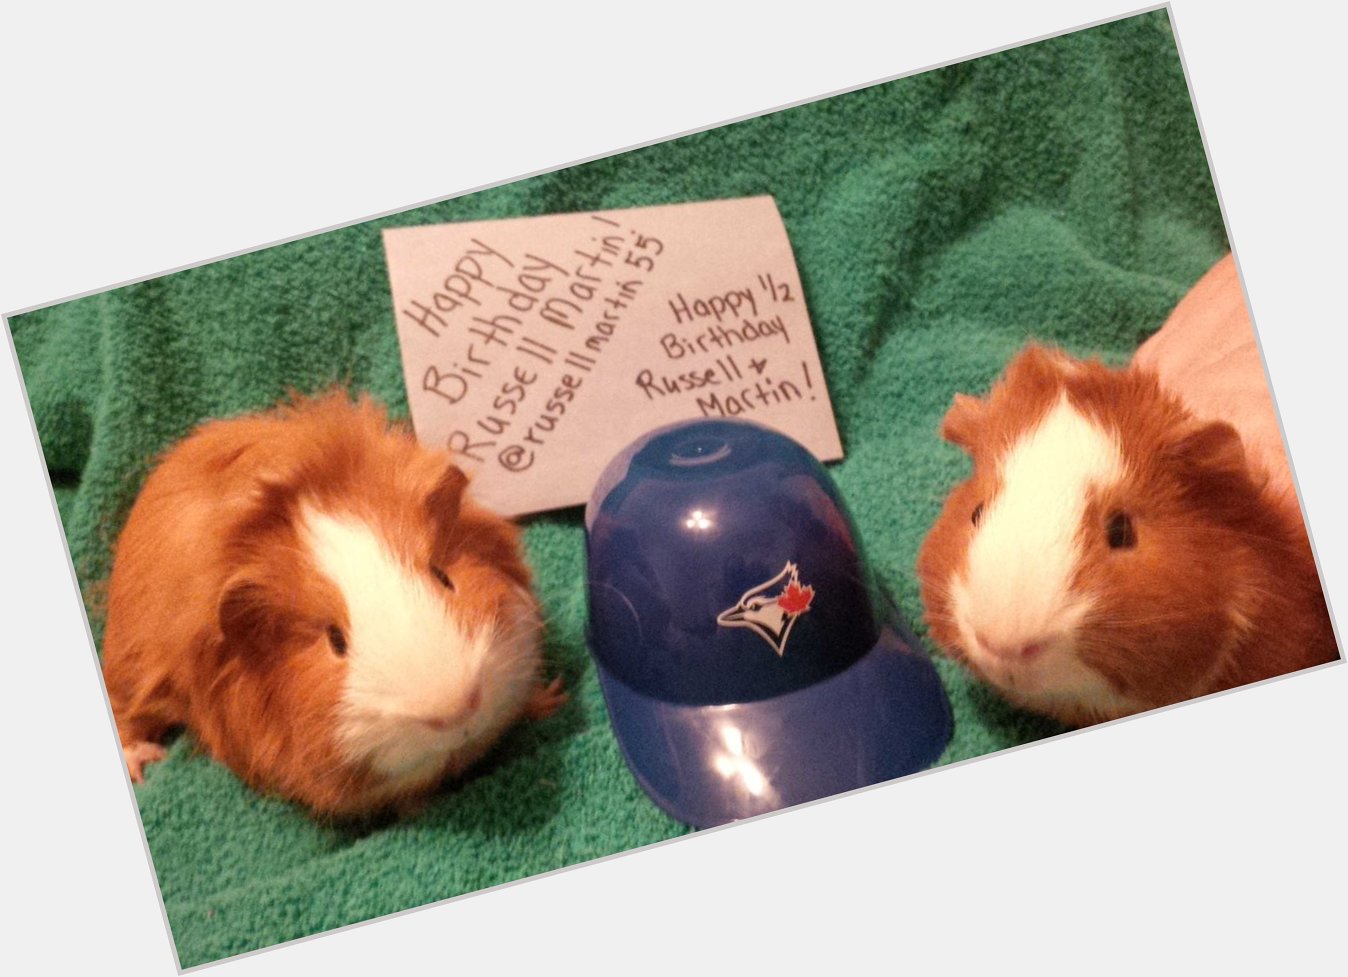 Happy 34th Birthday and a Happy 1/2 birthday to our piggies Russell & Martin!! 